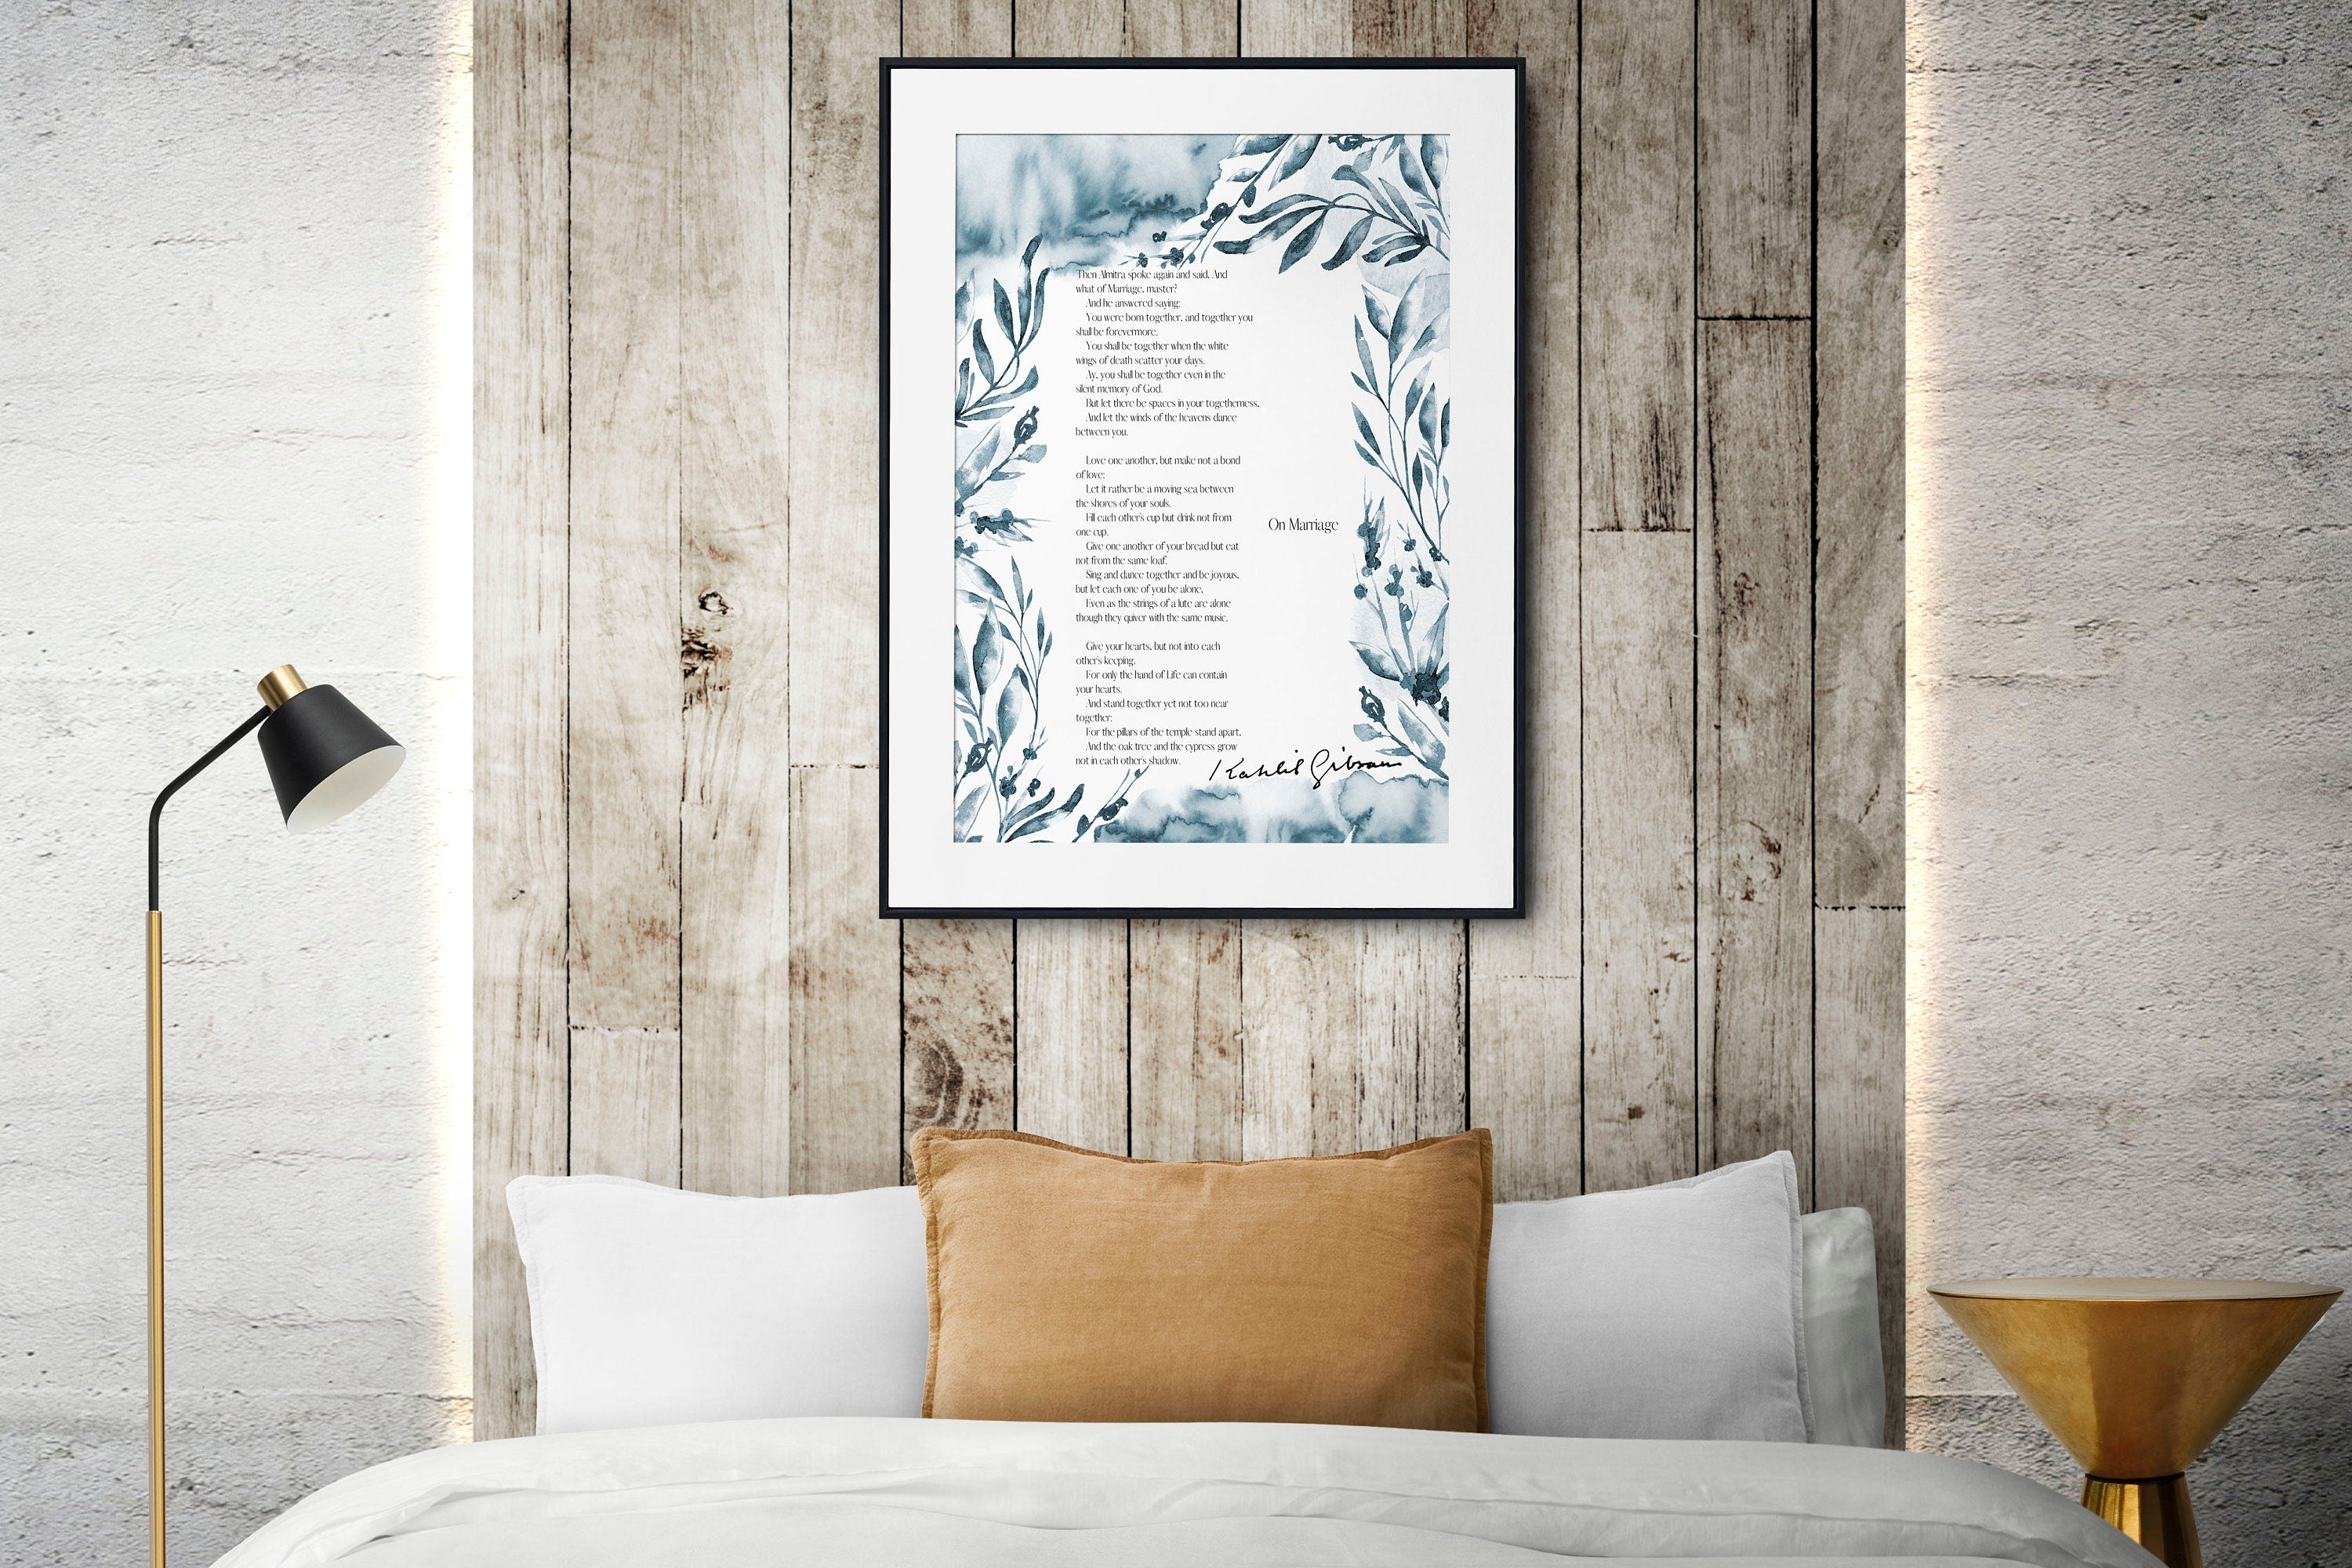 Kahlil Gibran On Marriage Poem Wall Art Print Framed or Unframed with Watercolor Botanical Detail, Love Poetry Literary Wall Art Decor